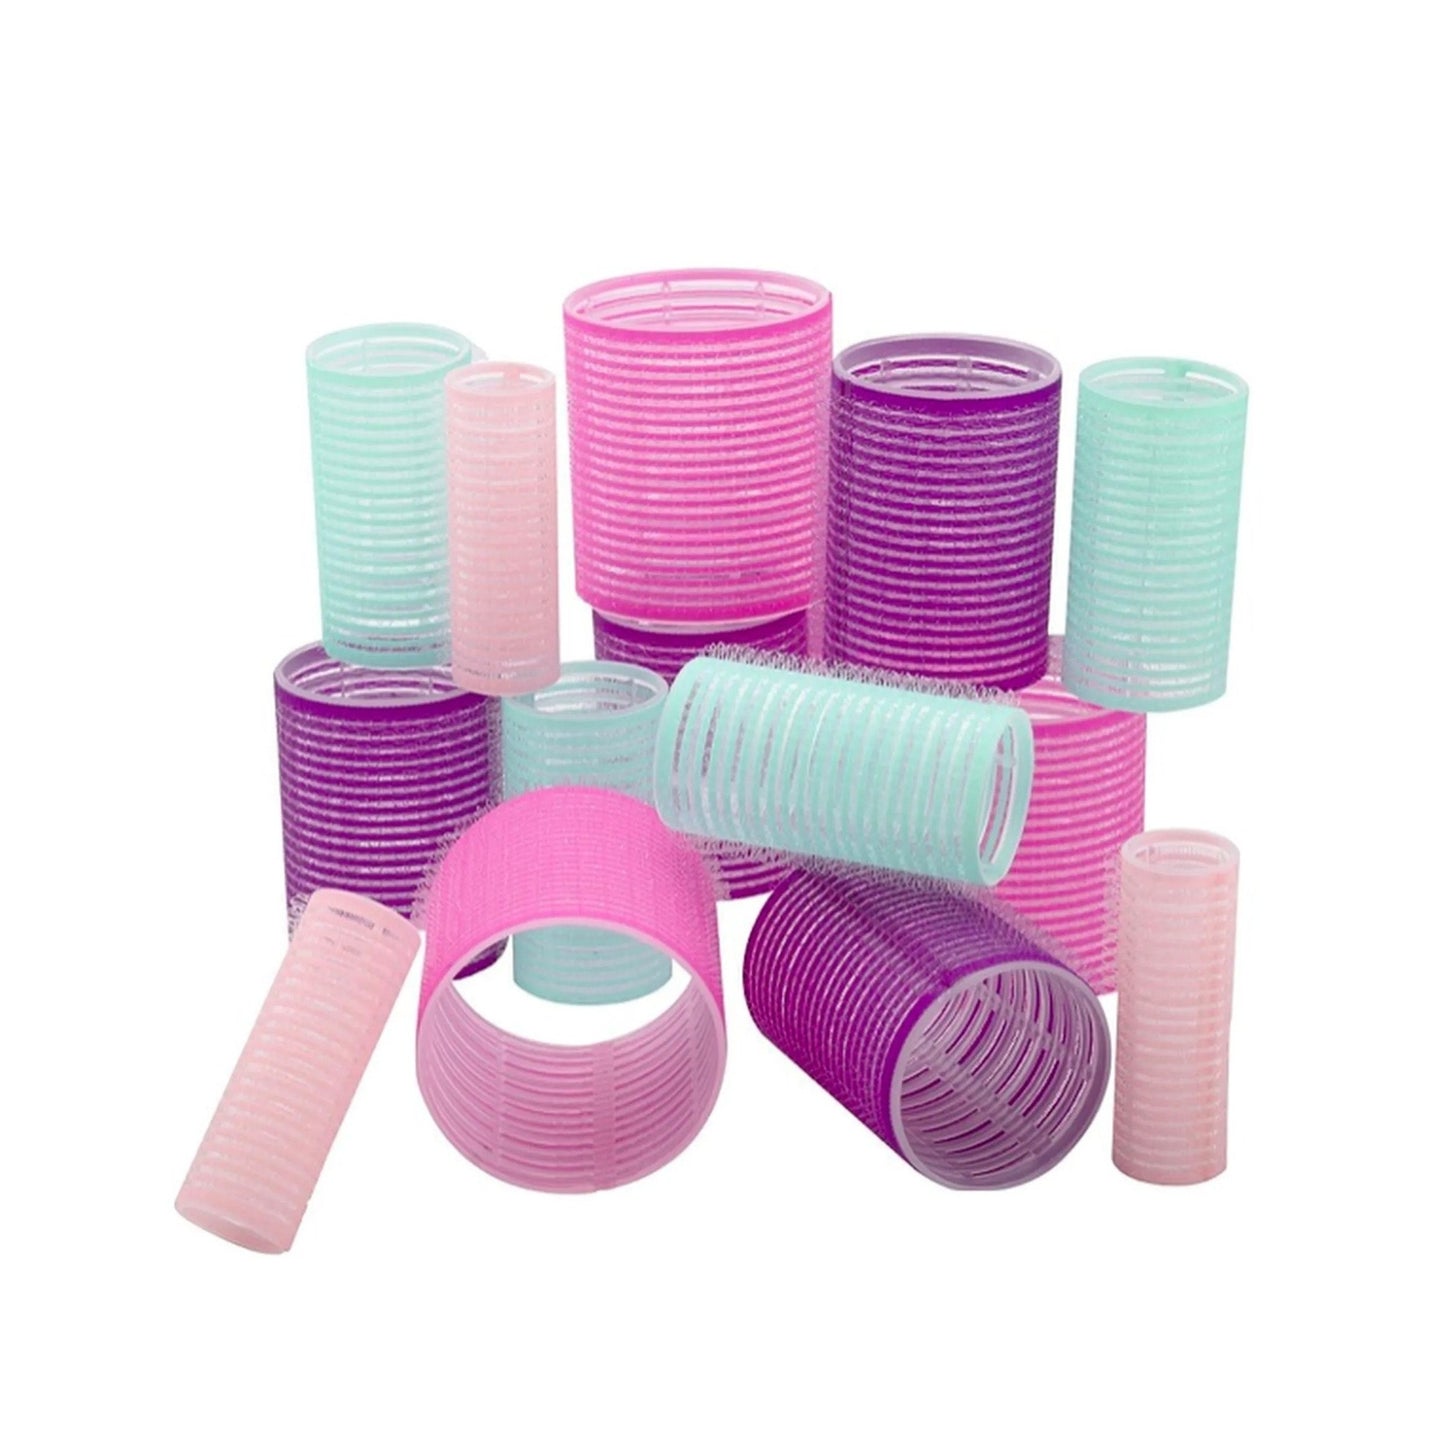 6 Pack Hair Rollers / Overnight Hair Rollers